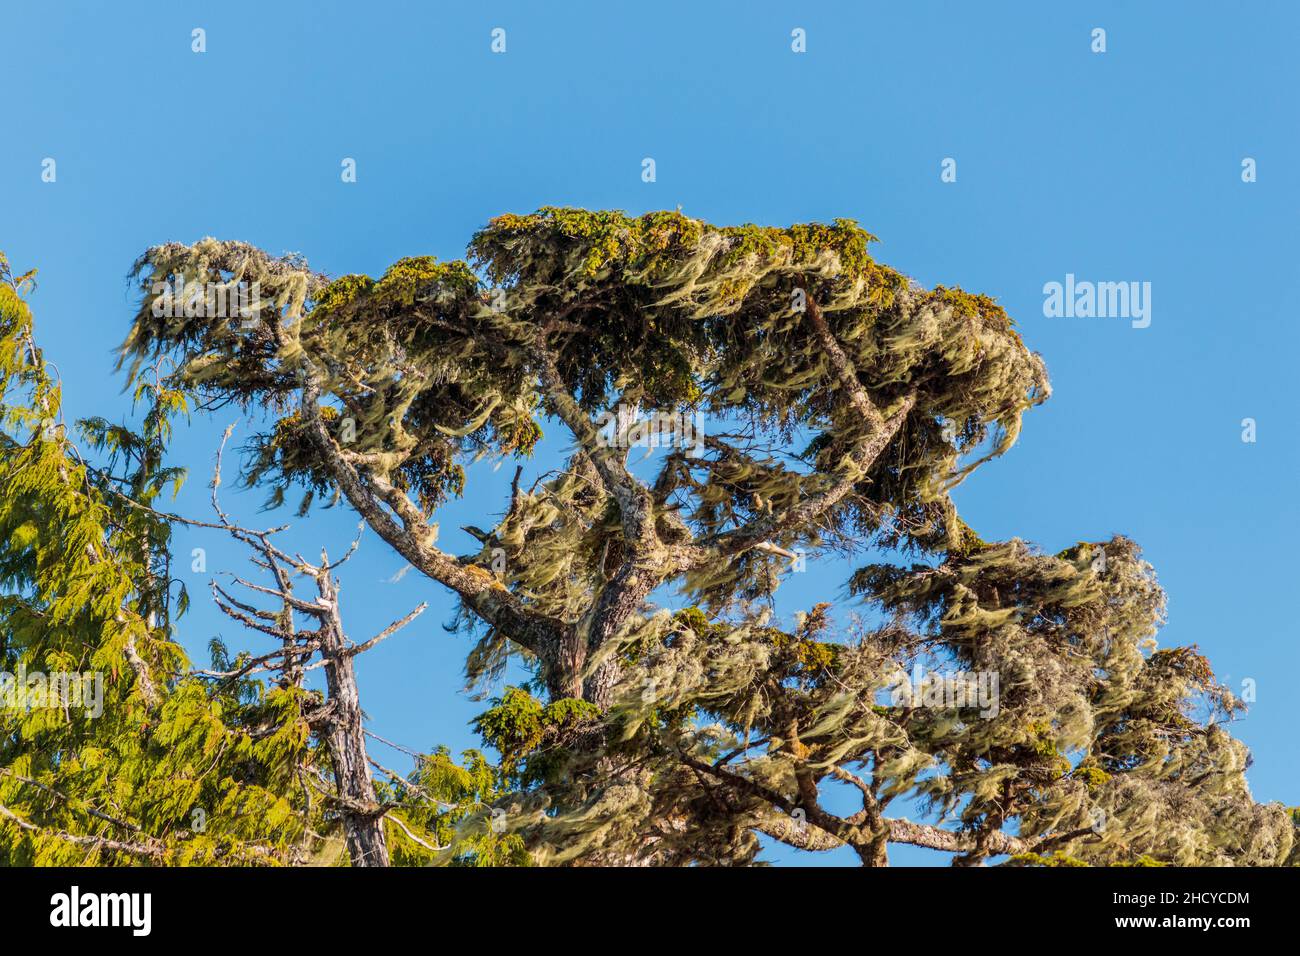 On British Columbia's exposed Central Coast, a tree stands against a bright blue sky, laden with dense moss and long hanging wind-blown lichens. Stock Photo